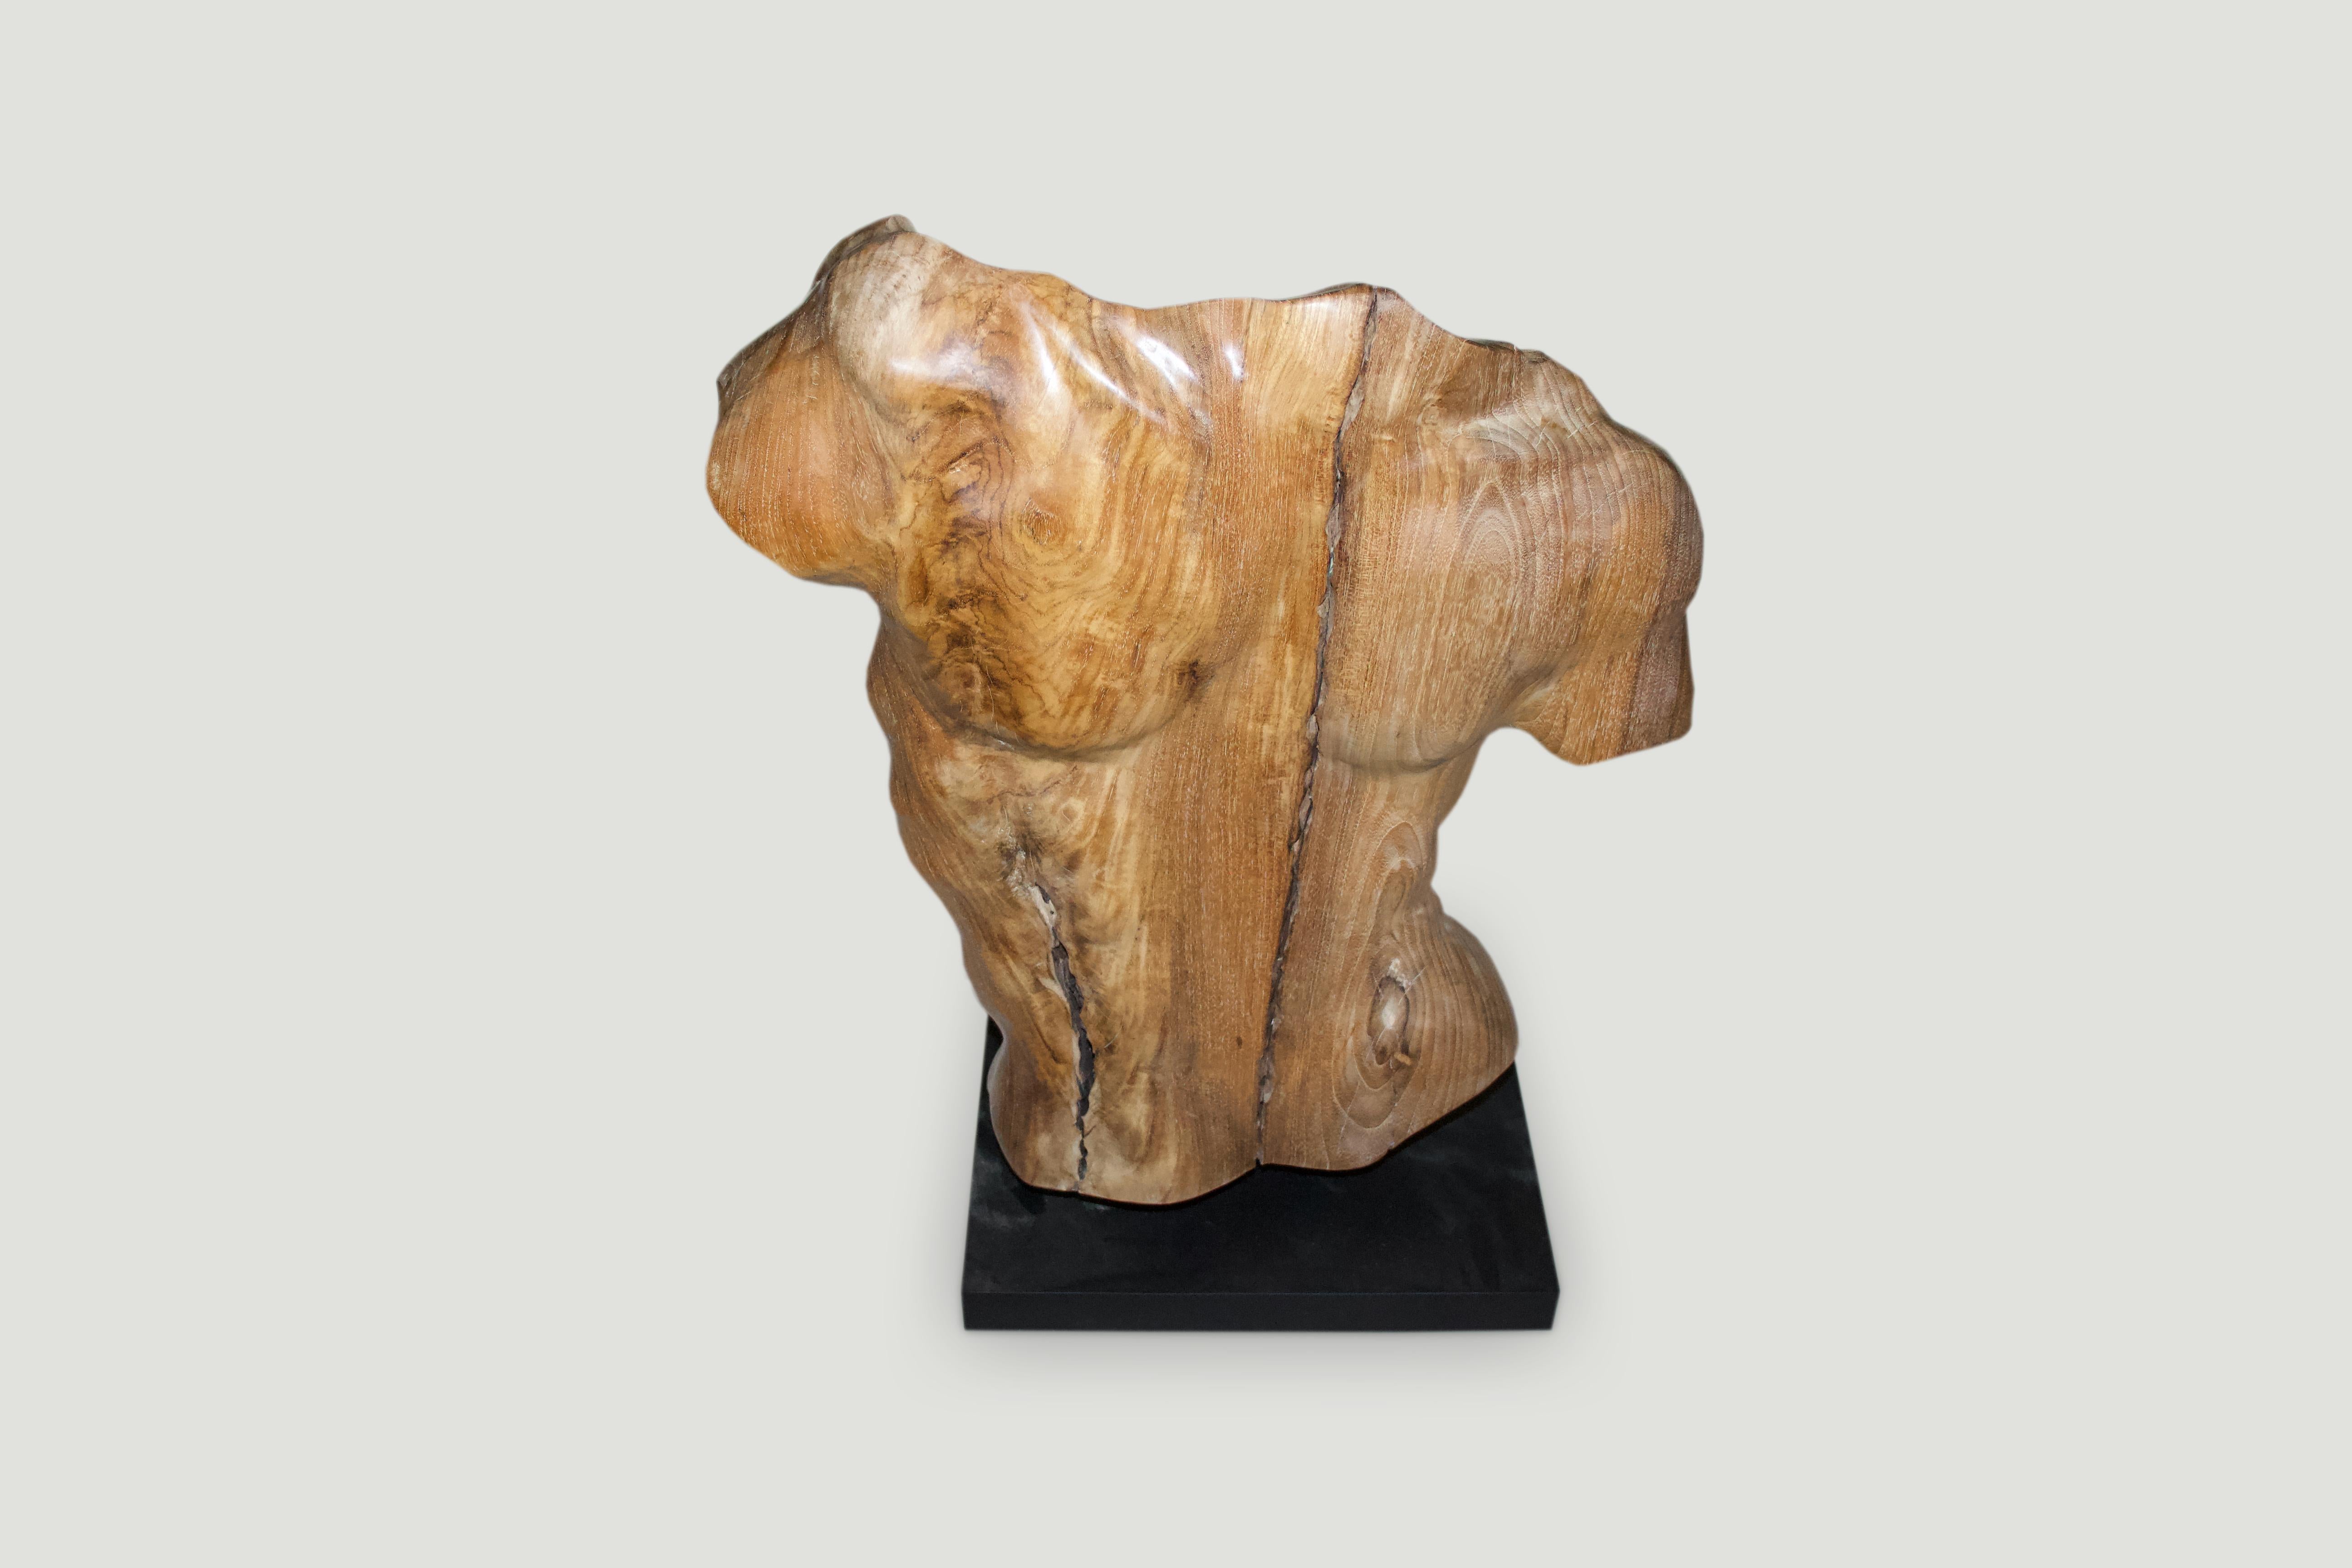 Hand carved from a single reclaimed teak wood root with natural oil finish, a male torso. Shown on a black metal base.

Own an Andrianna Shamaris original.

Andrianna Shamaris. The Leader In Modern Organic Design.